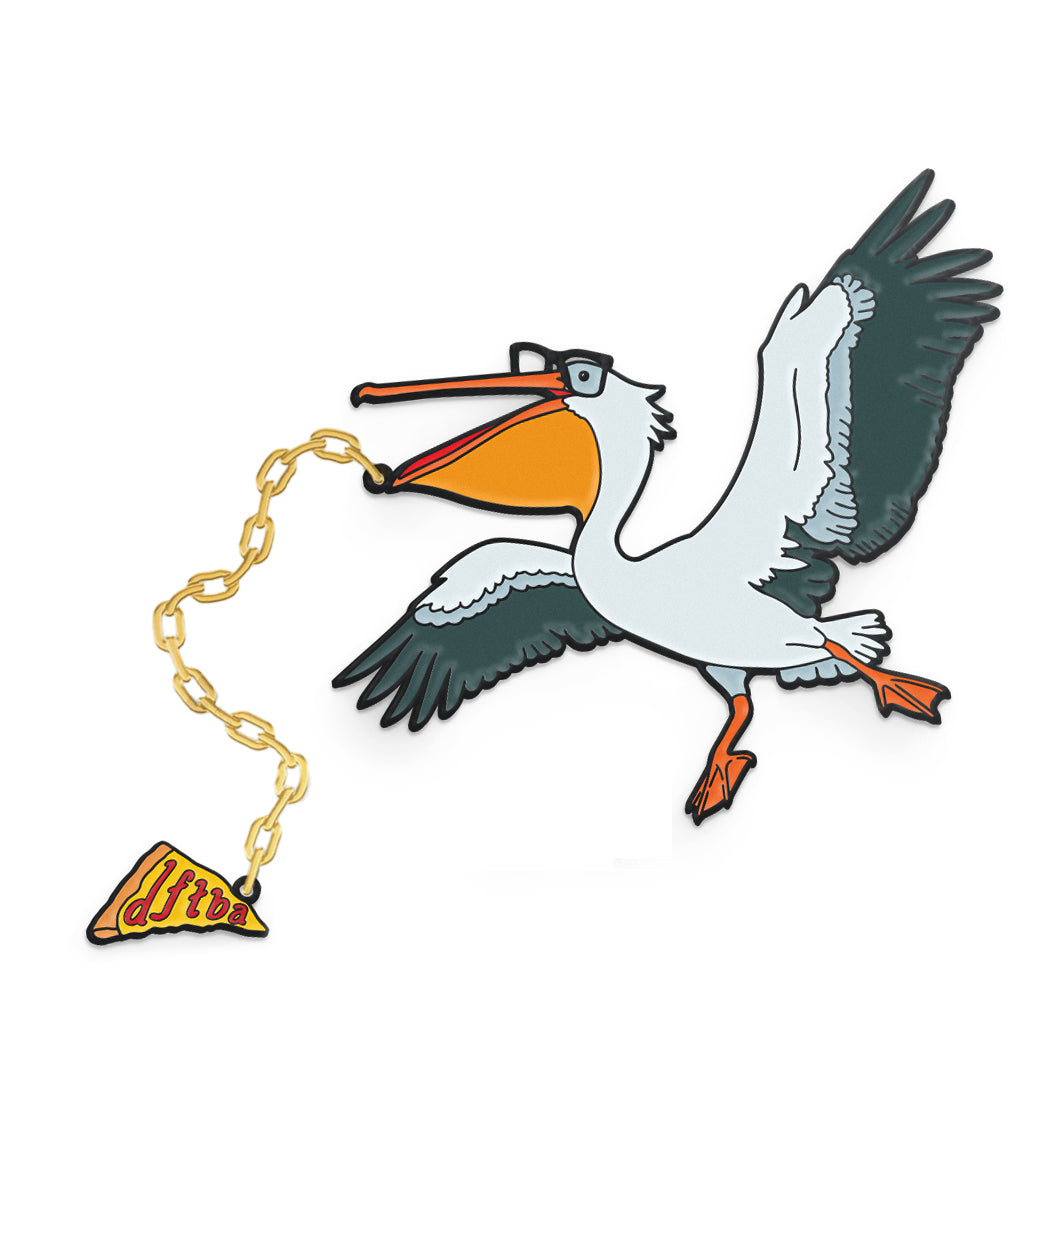 A pin shaped link a pelican wearing glasses (meant to look like Hank Green) with a golden chain attached to its lower bill that connects to a slice of pizza with 